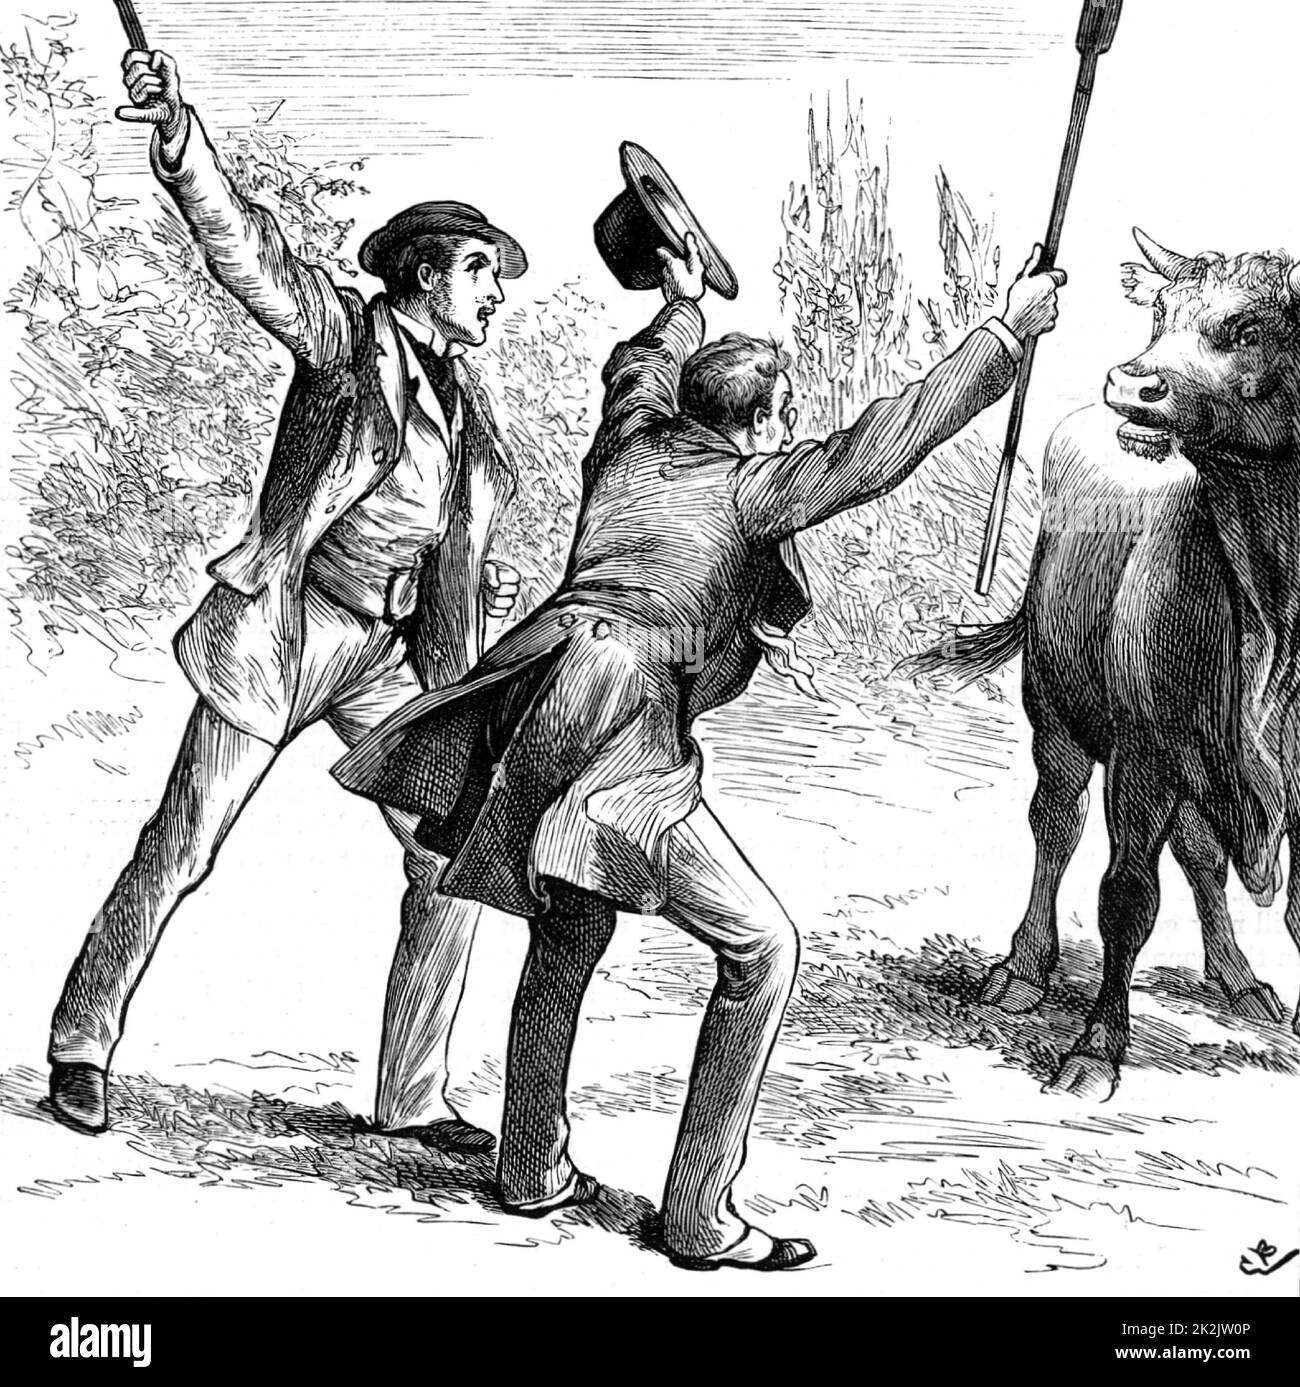 Johnny Eames helping Lord de Guest escape from the angry bull. Illustration of 1883 by Gordon Frederick Browne (1858-1932) for 'The Small House at Allington' by Anthony Trollope, first published in 1862, the fifth in his series of Barsetshire novels. Stock Photo